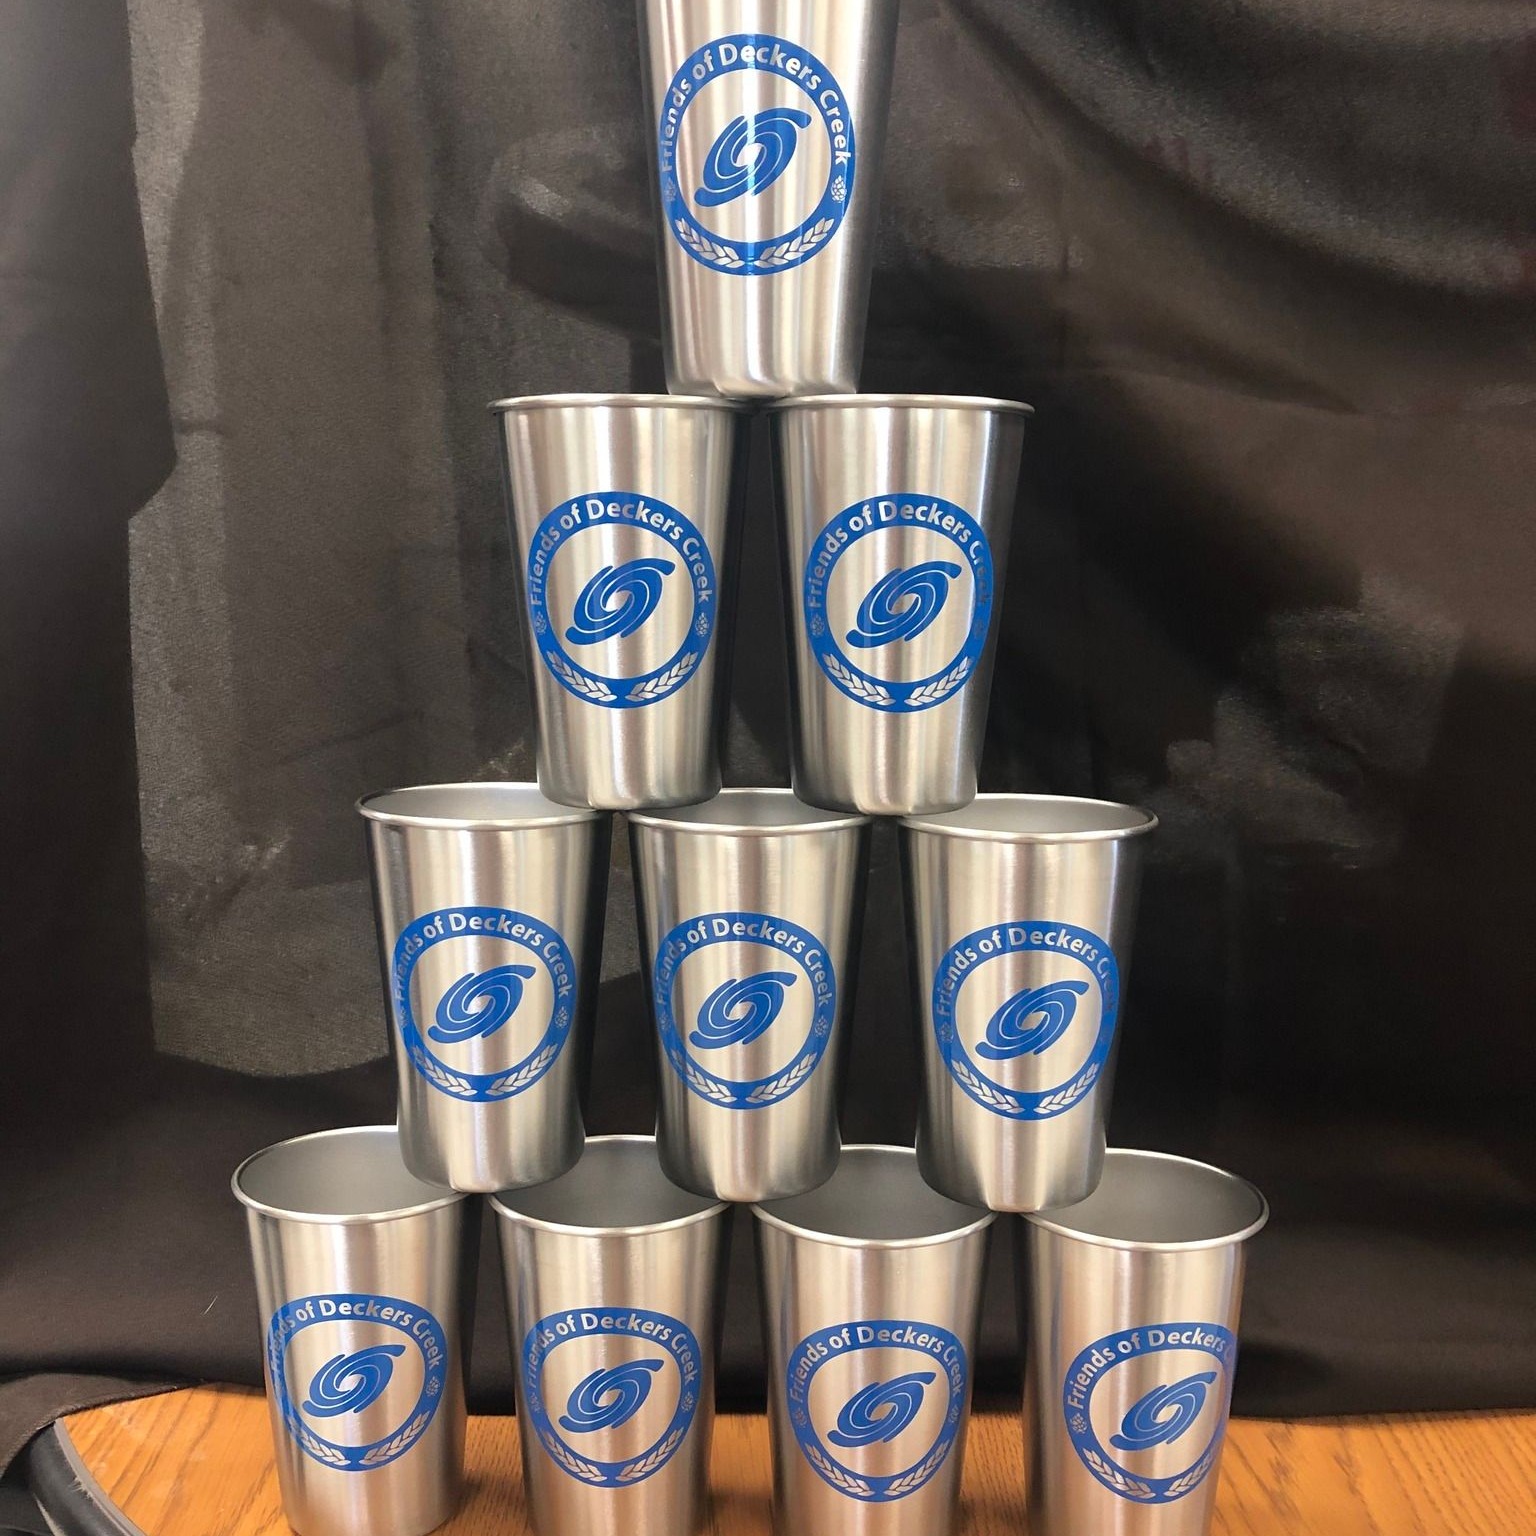 Reusable Metal FODC pint glasses stacked up on one another in a pyramid.